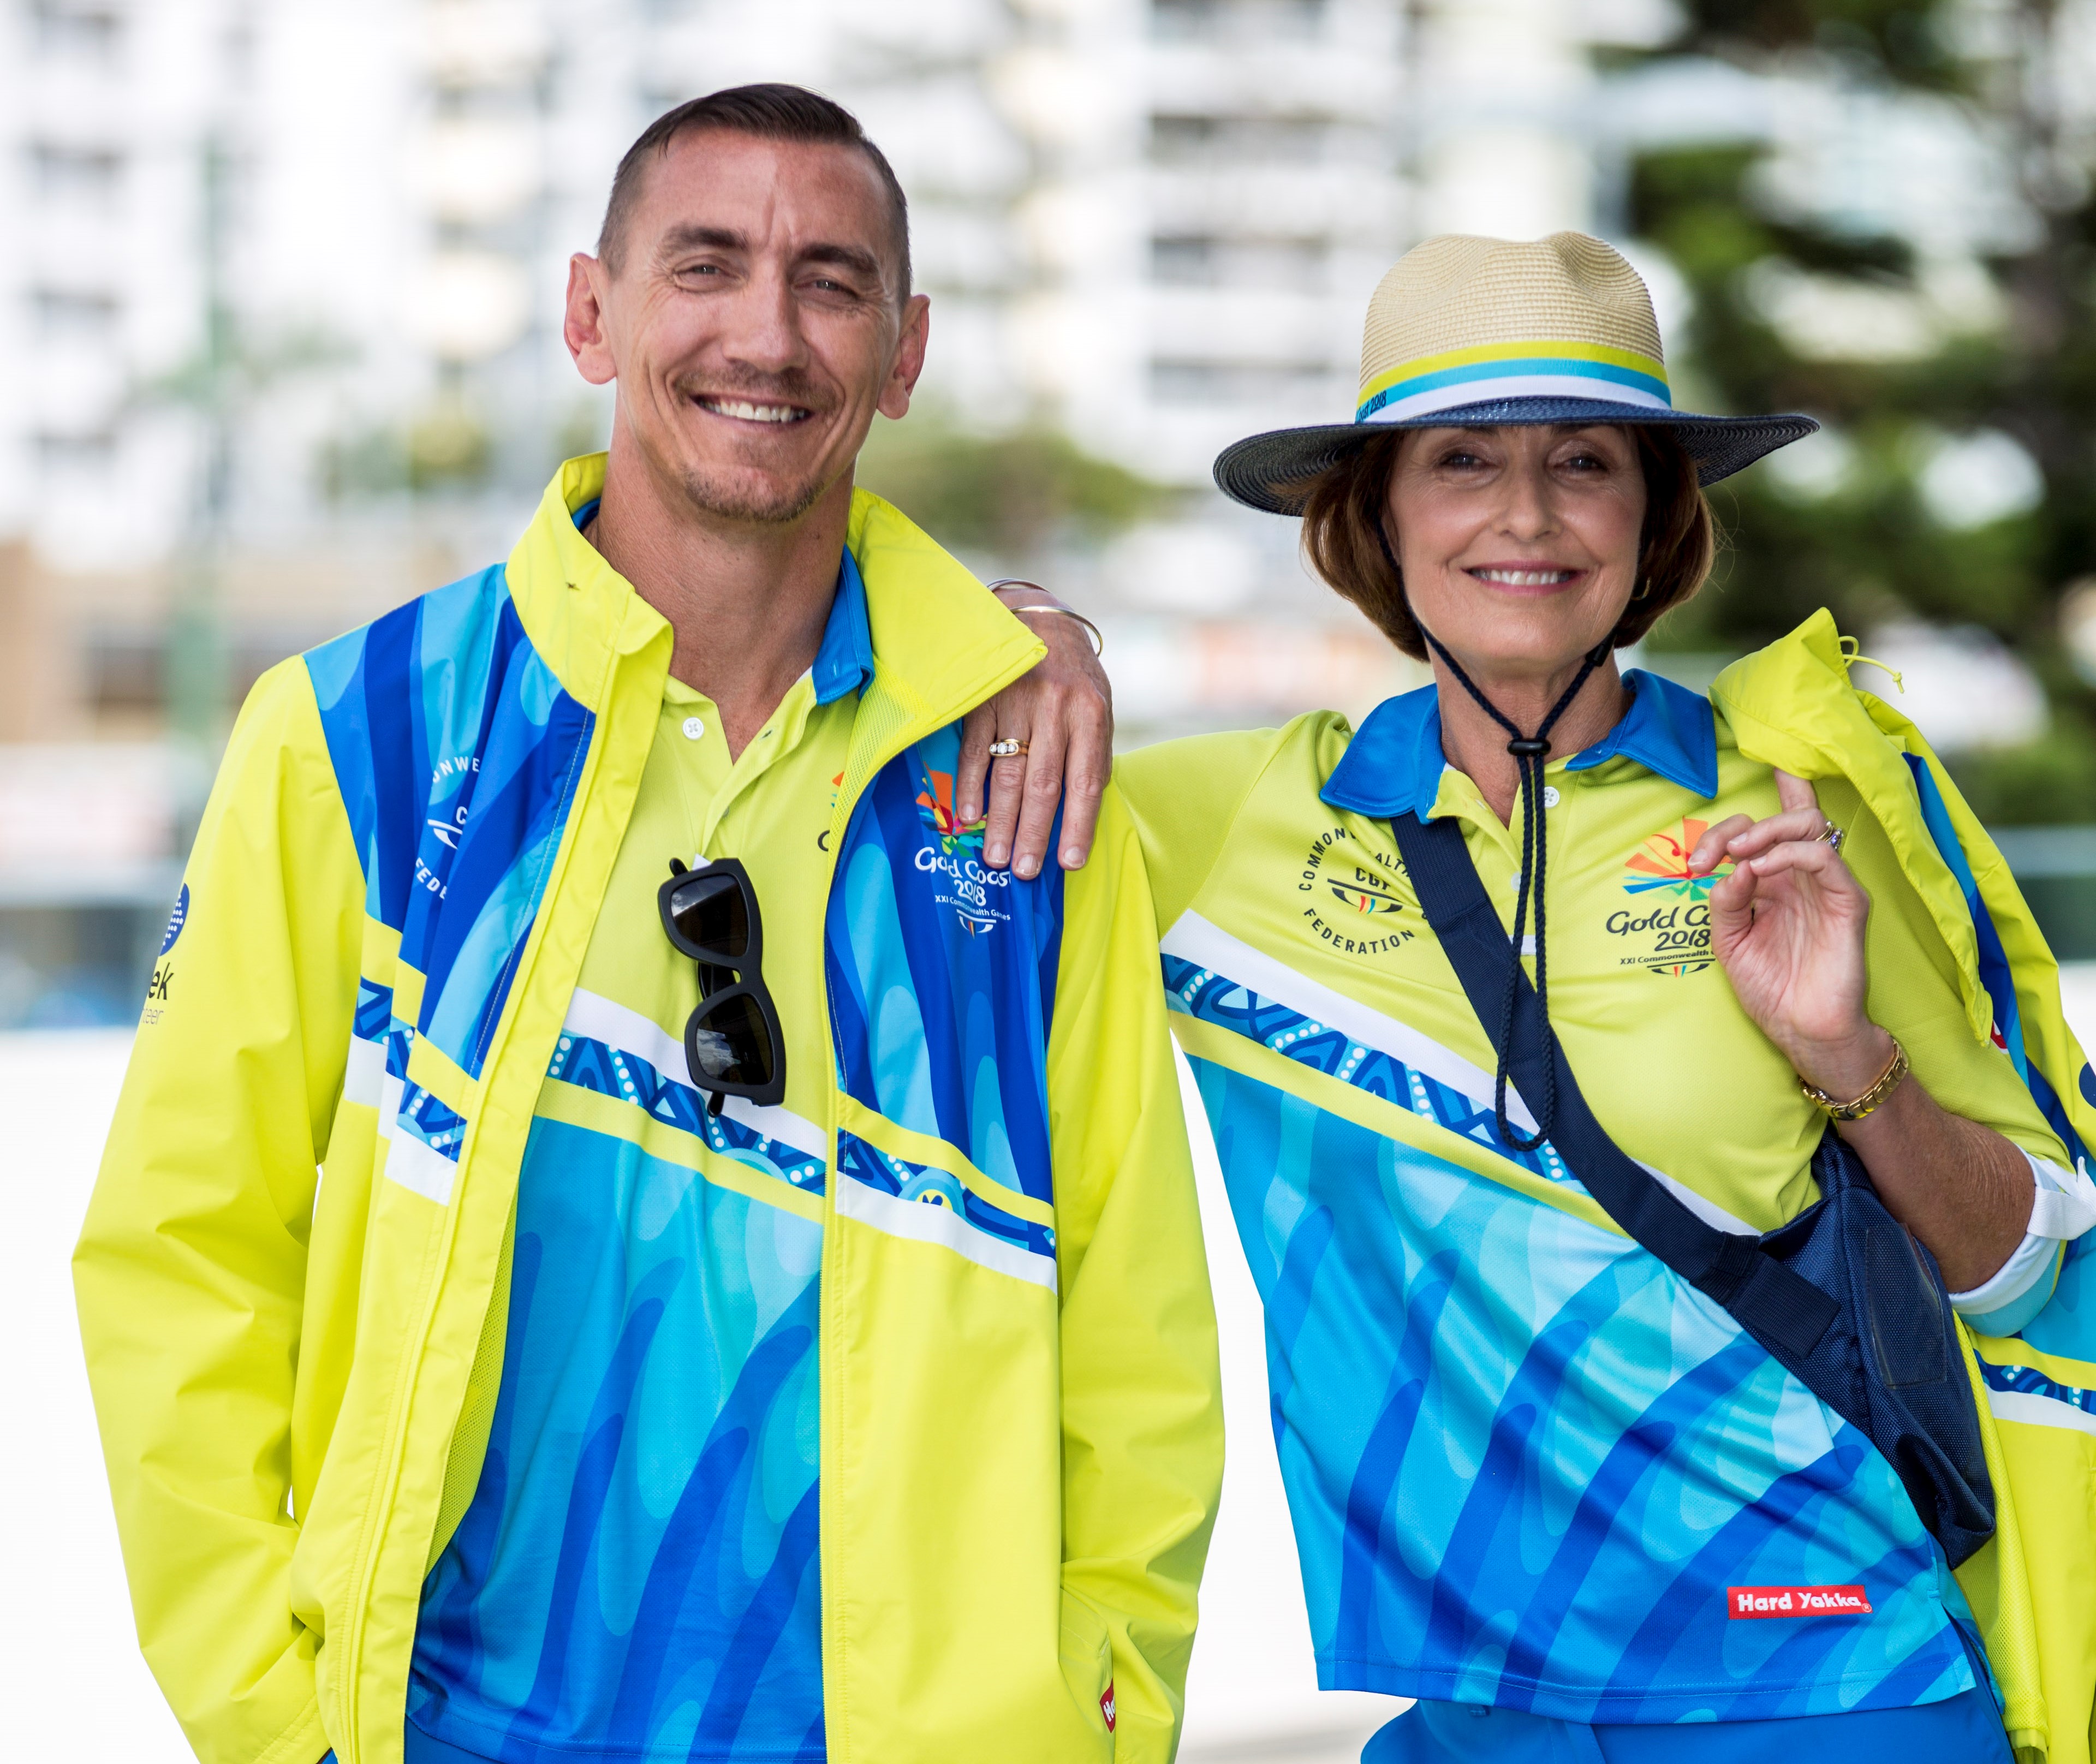 QCA graduate Samuel Keen designed the logo to be used on the uniform of the official Games workforce during GC2018.